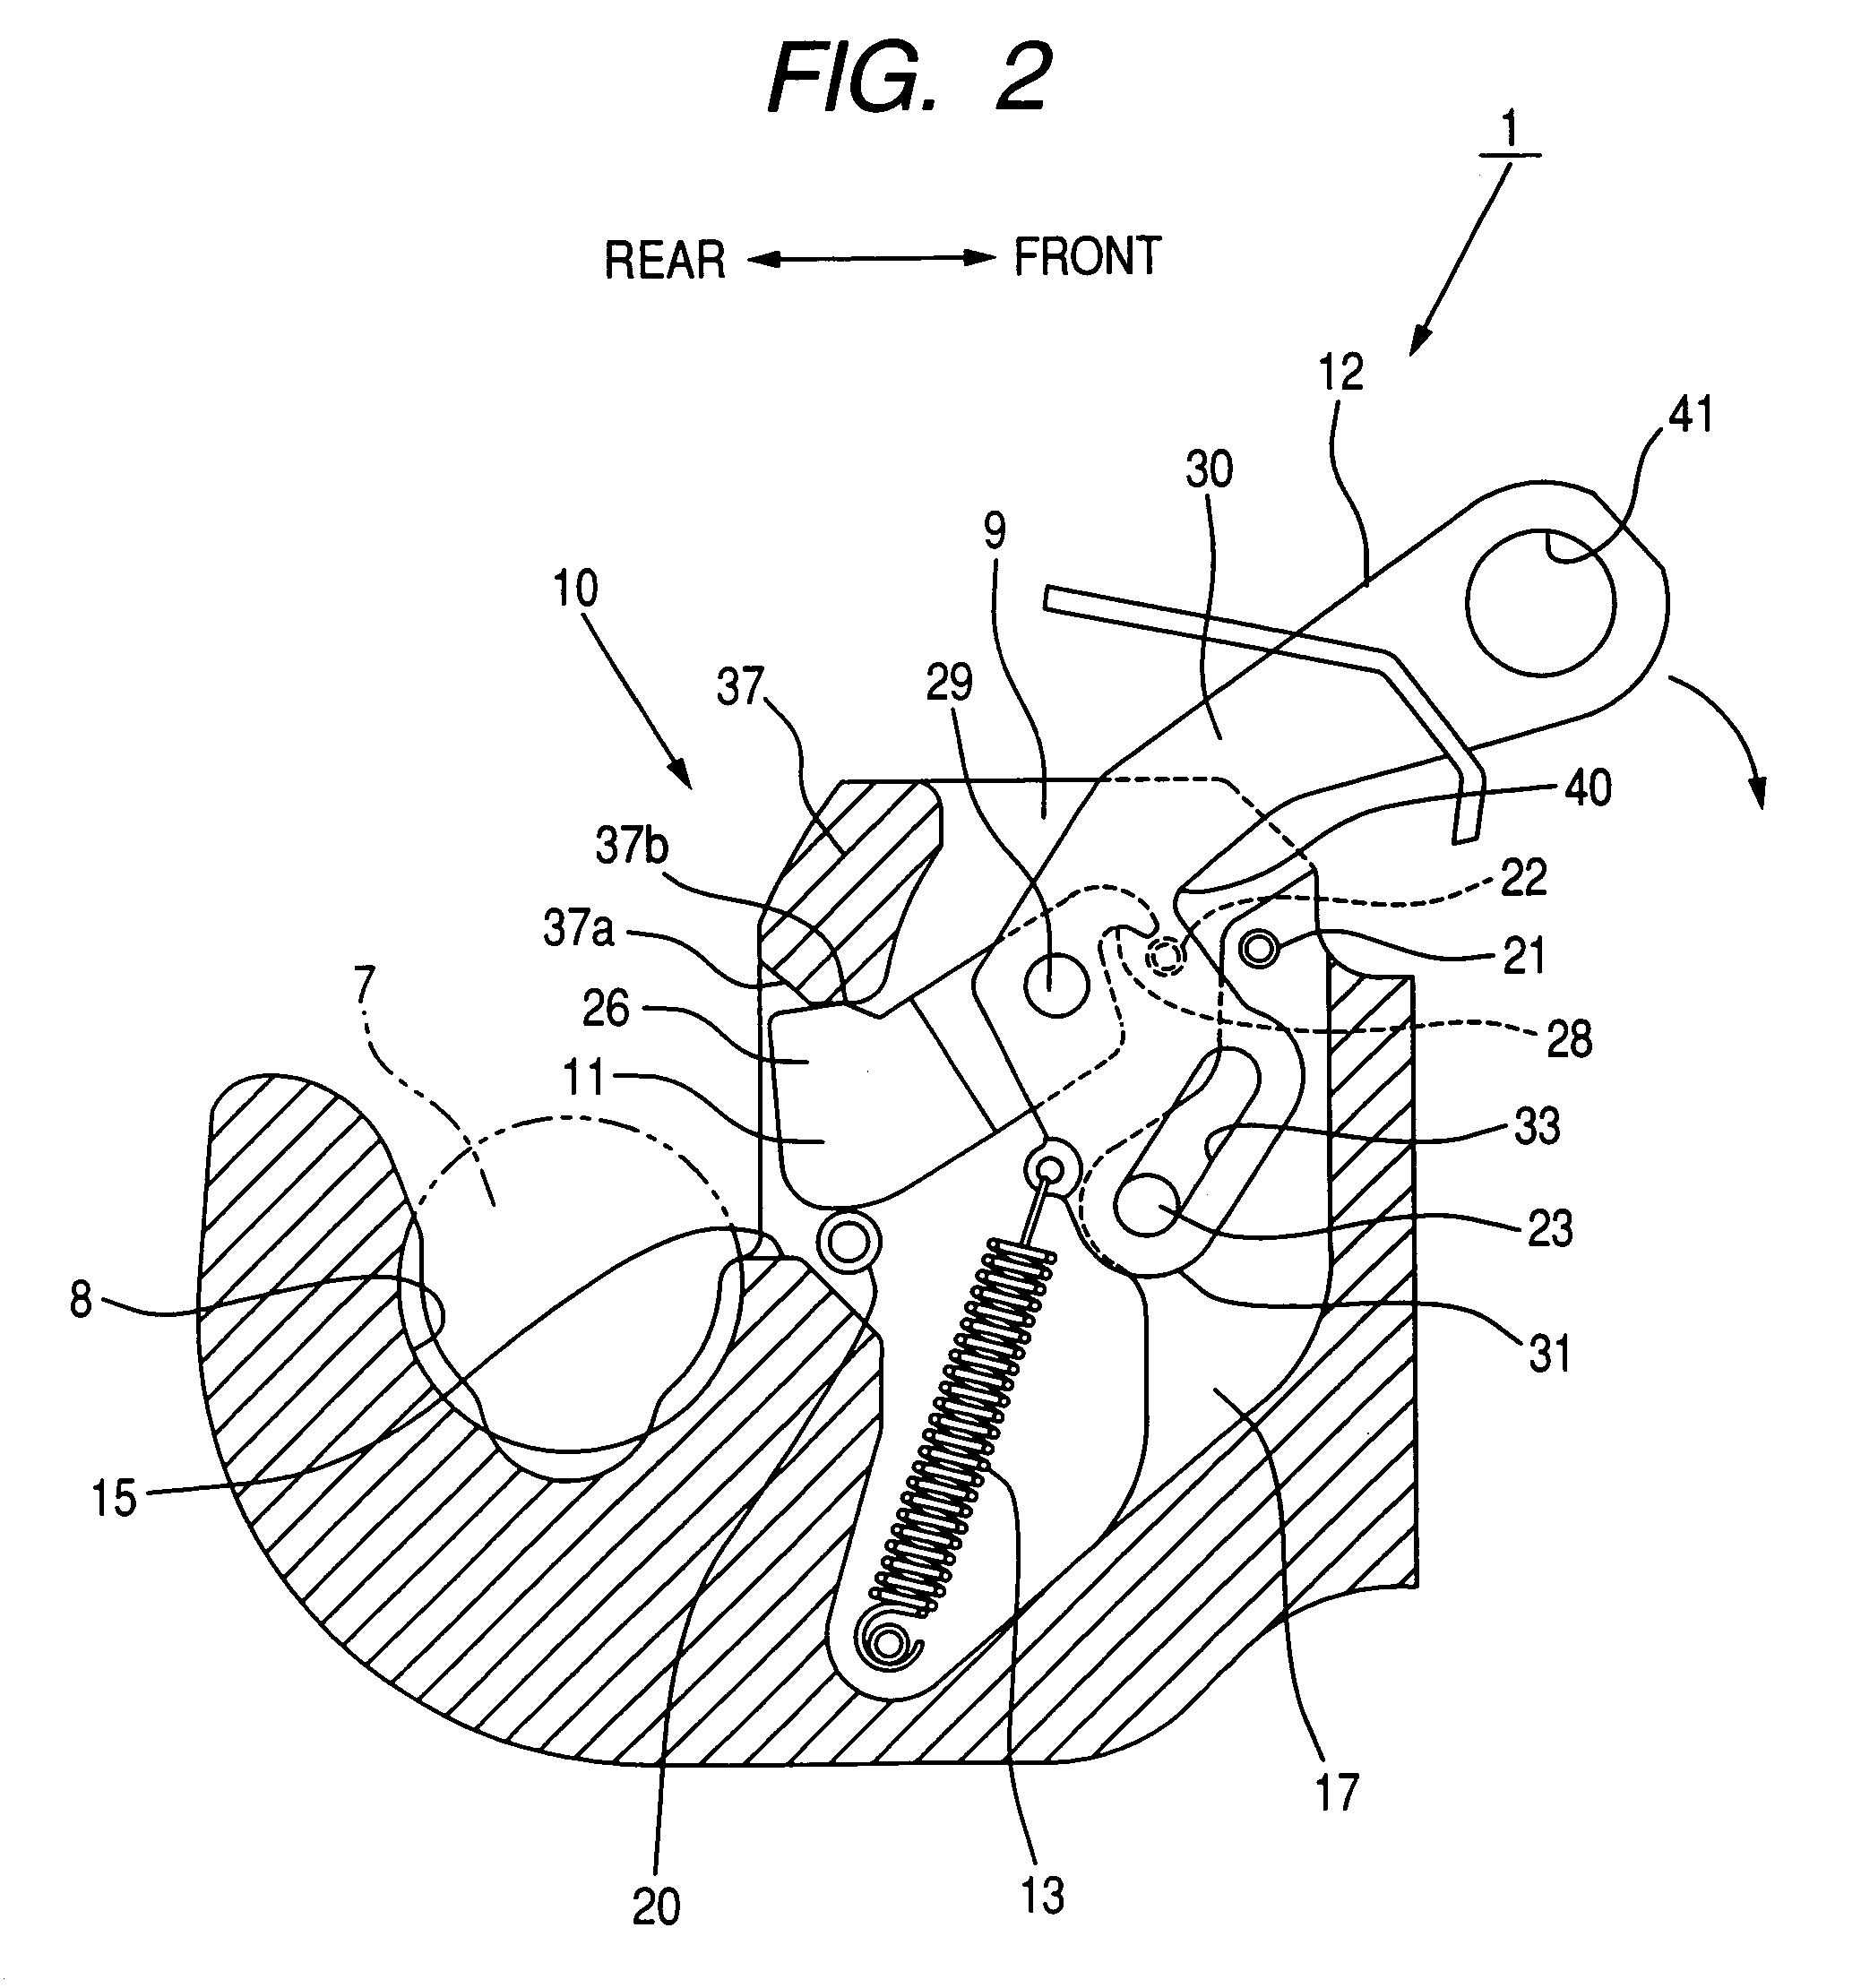 Device for coupling implement to agricultural tractor